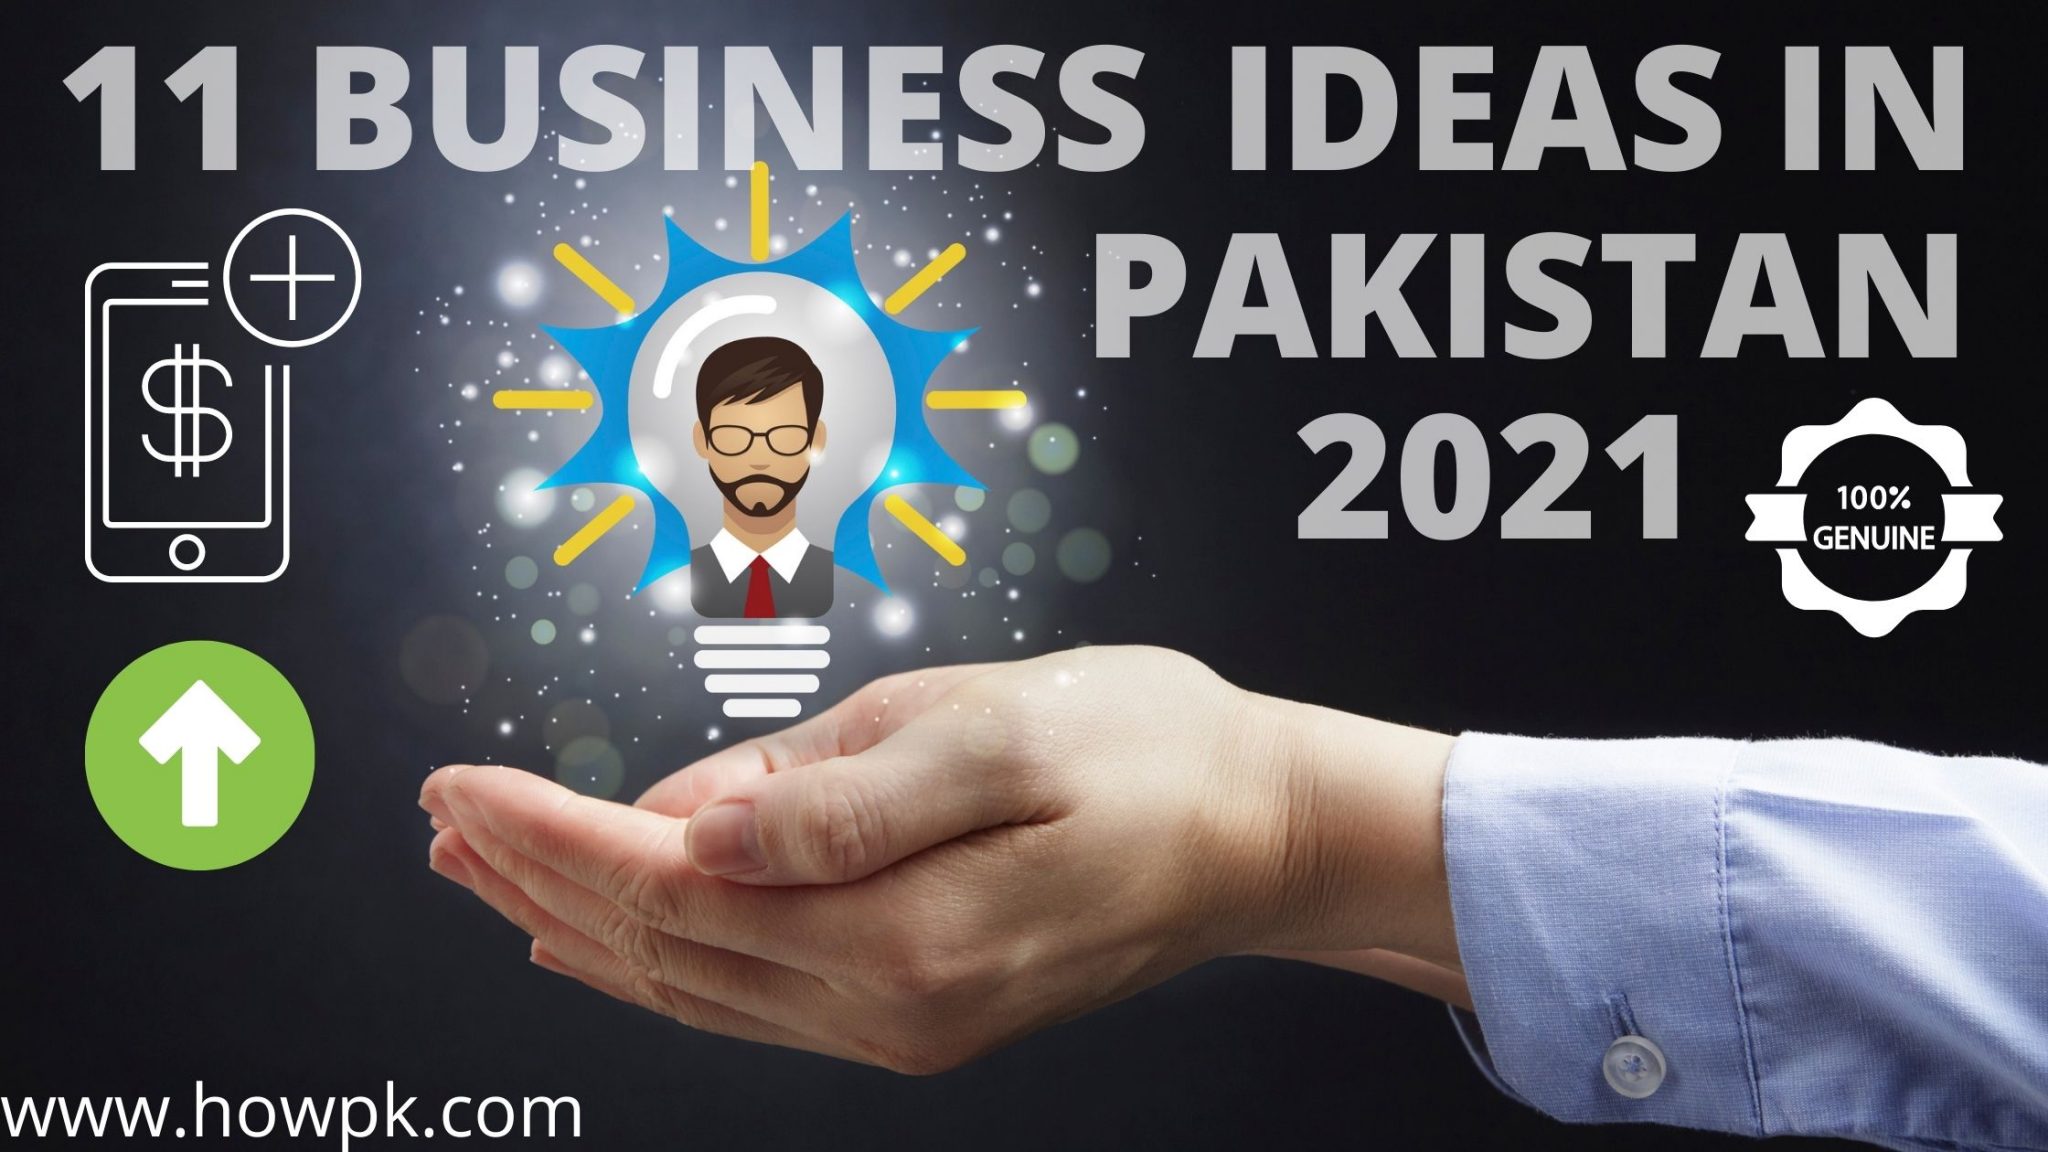 Top 11 Business Ideas In Pakistan 2021 (Low Investment) | HowPk